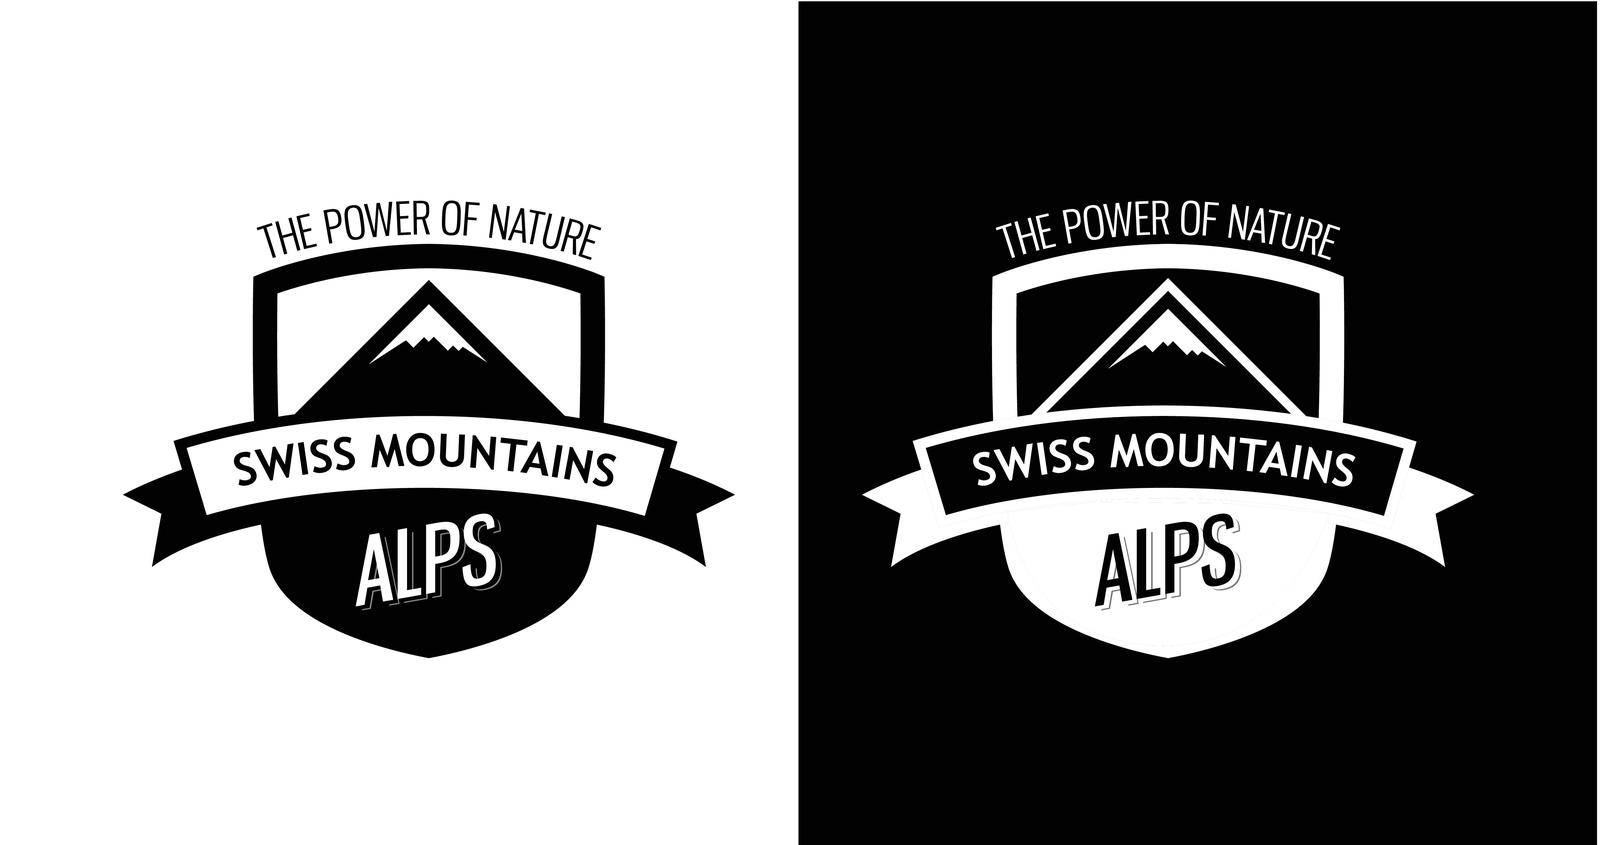 Emblem with Swiss Mountains by macroarting